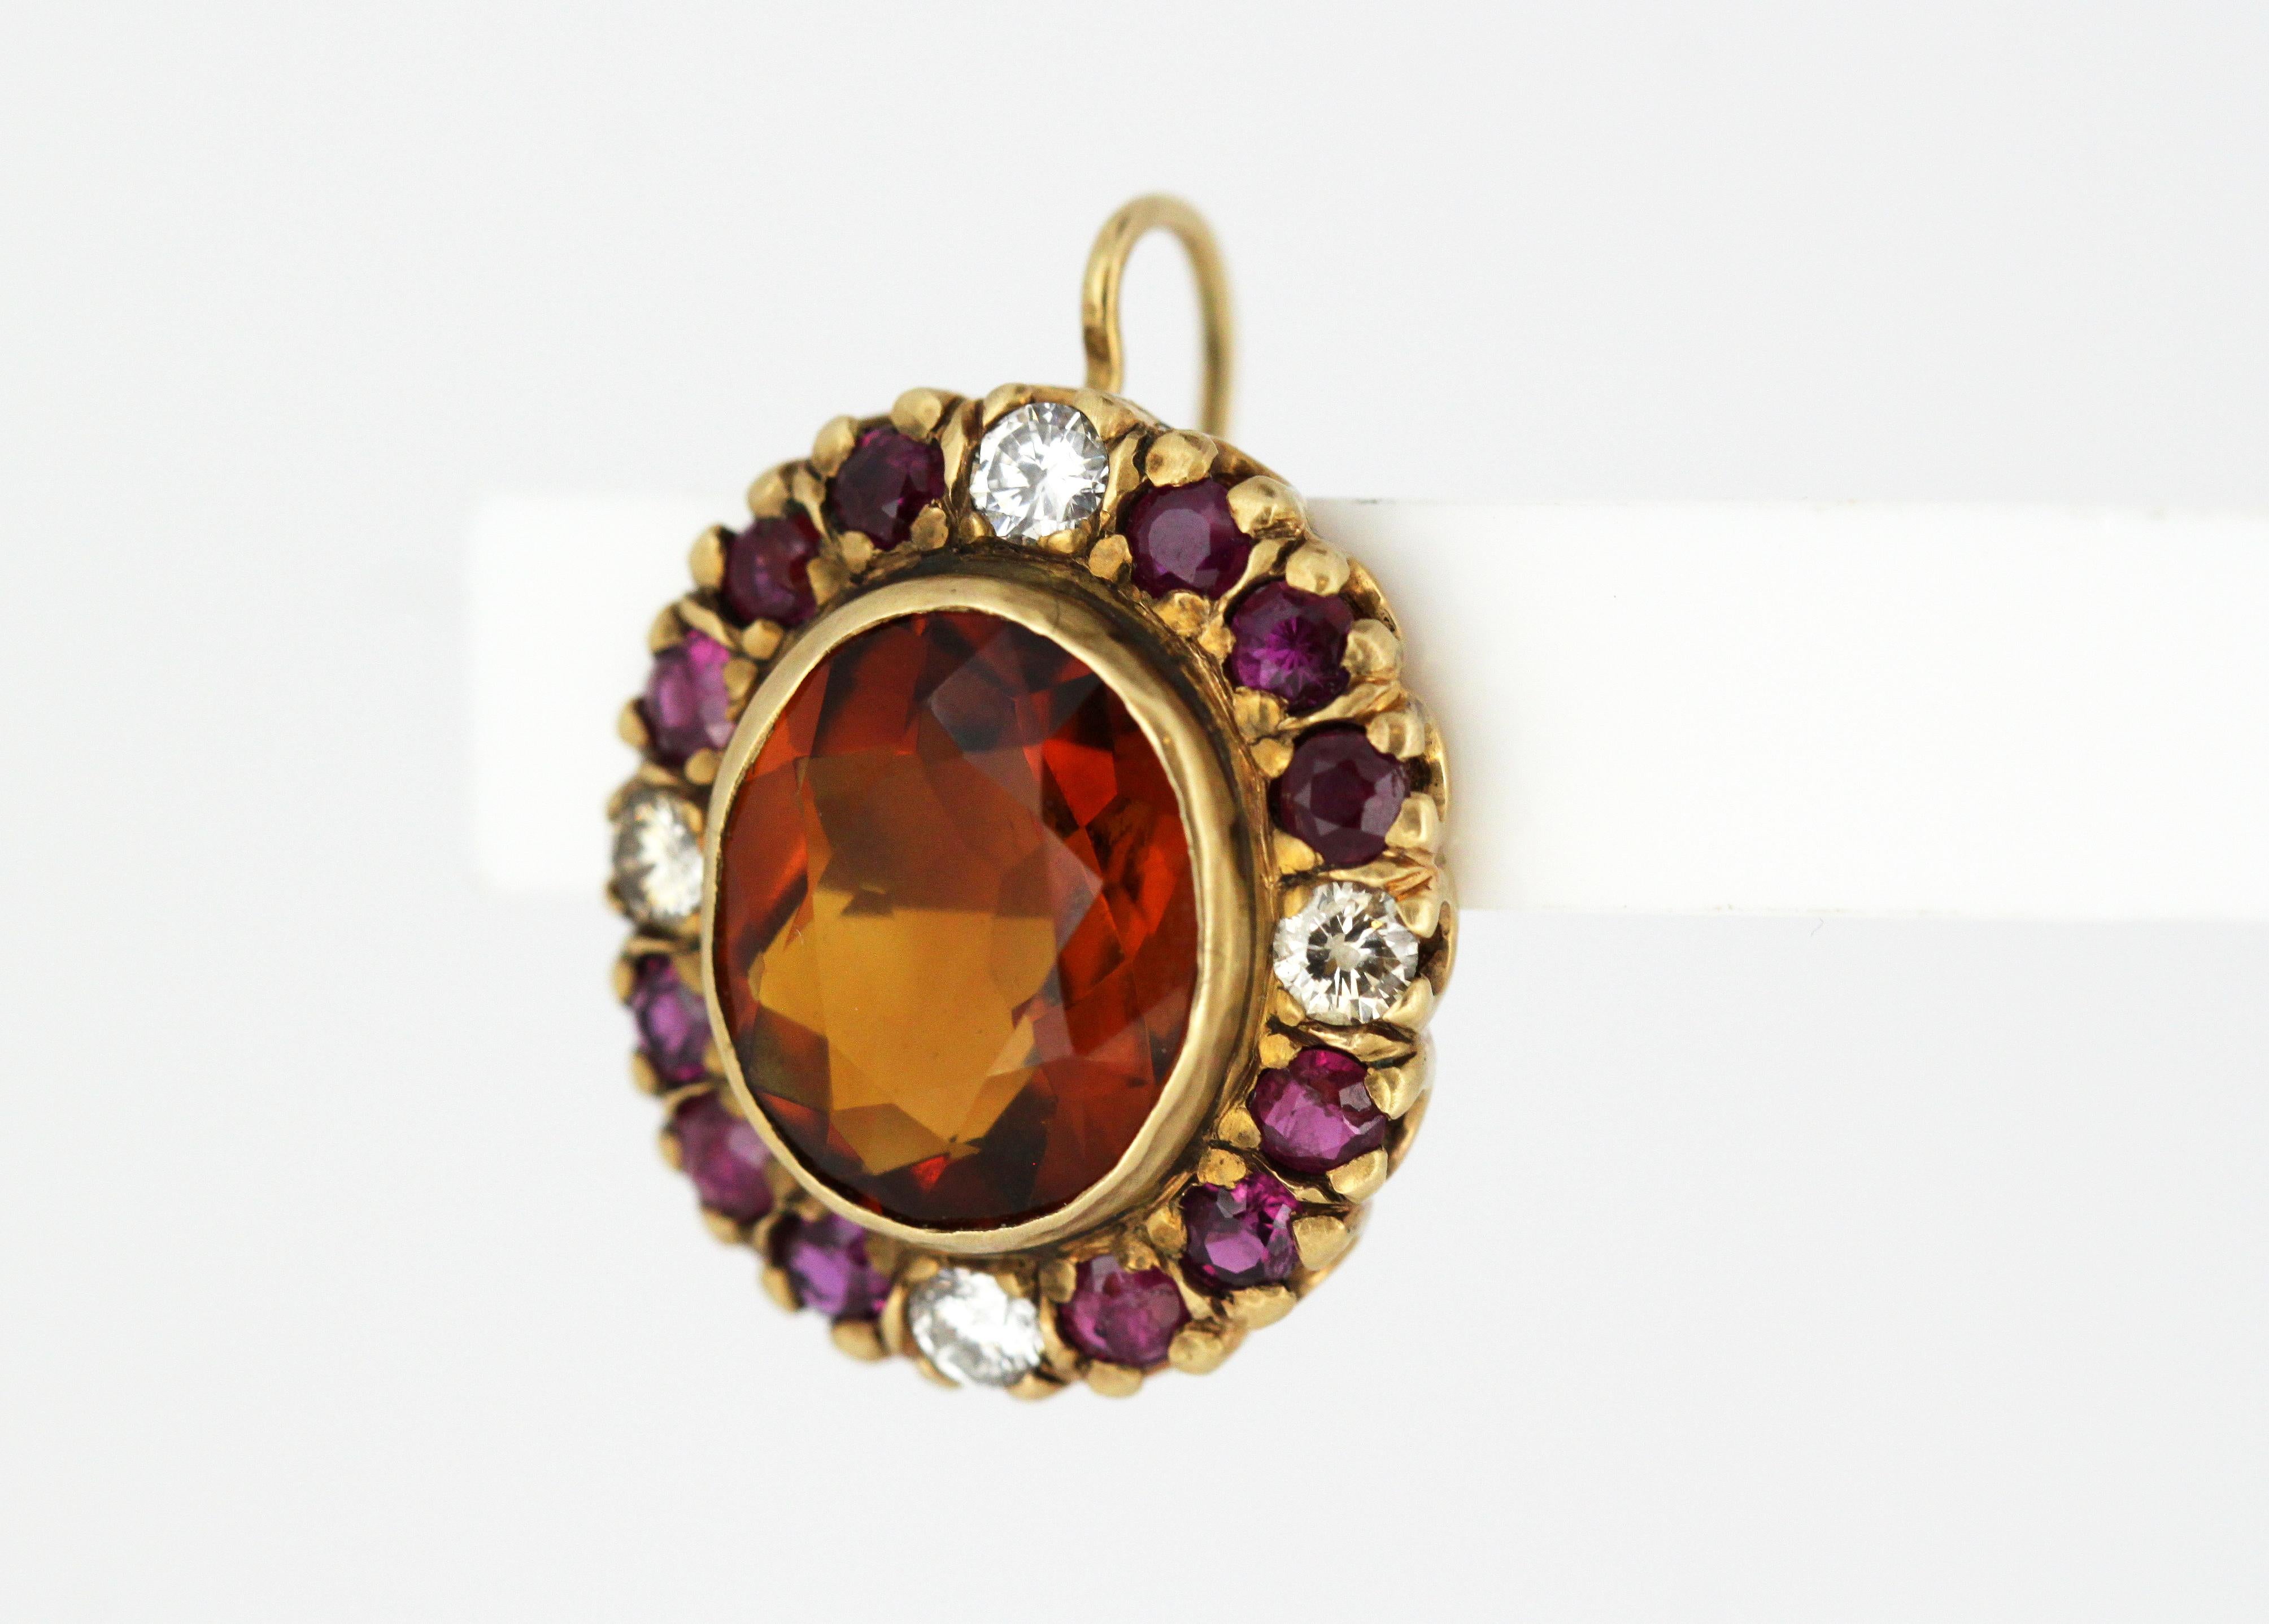 18kt Yellow Gold Ladies Clip-On Earrings with Garnets, Diamonds and Rubies, 1970 2